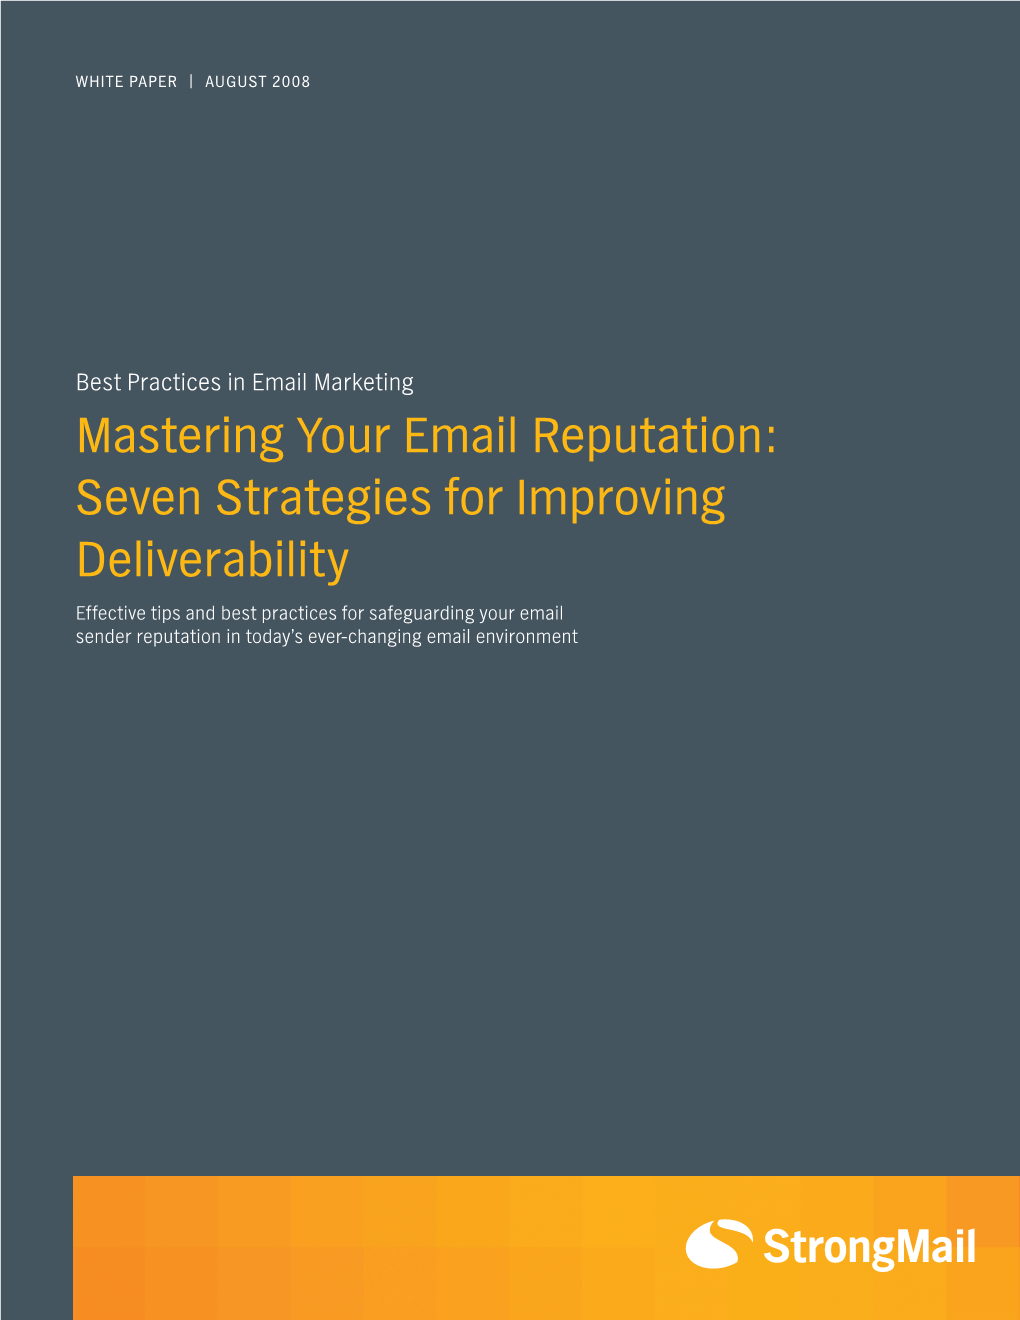 Mastering Your Email Reputation: Seven Strategies for Improving